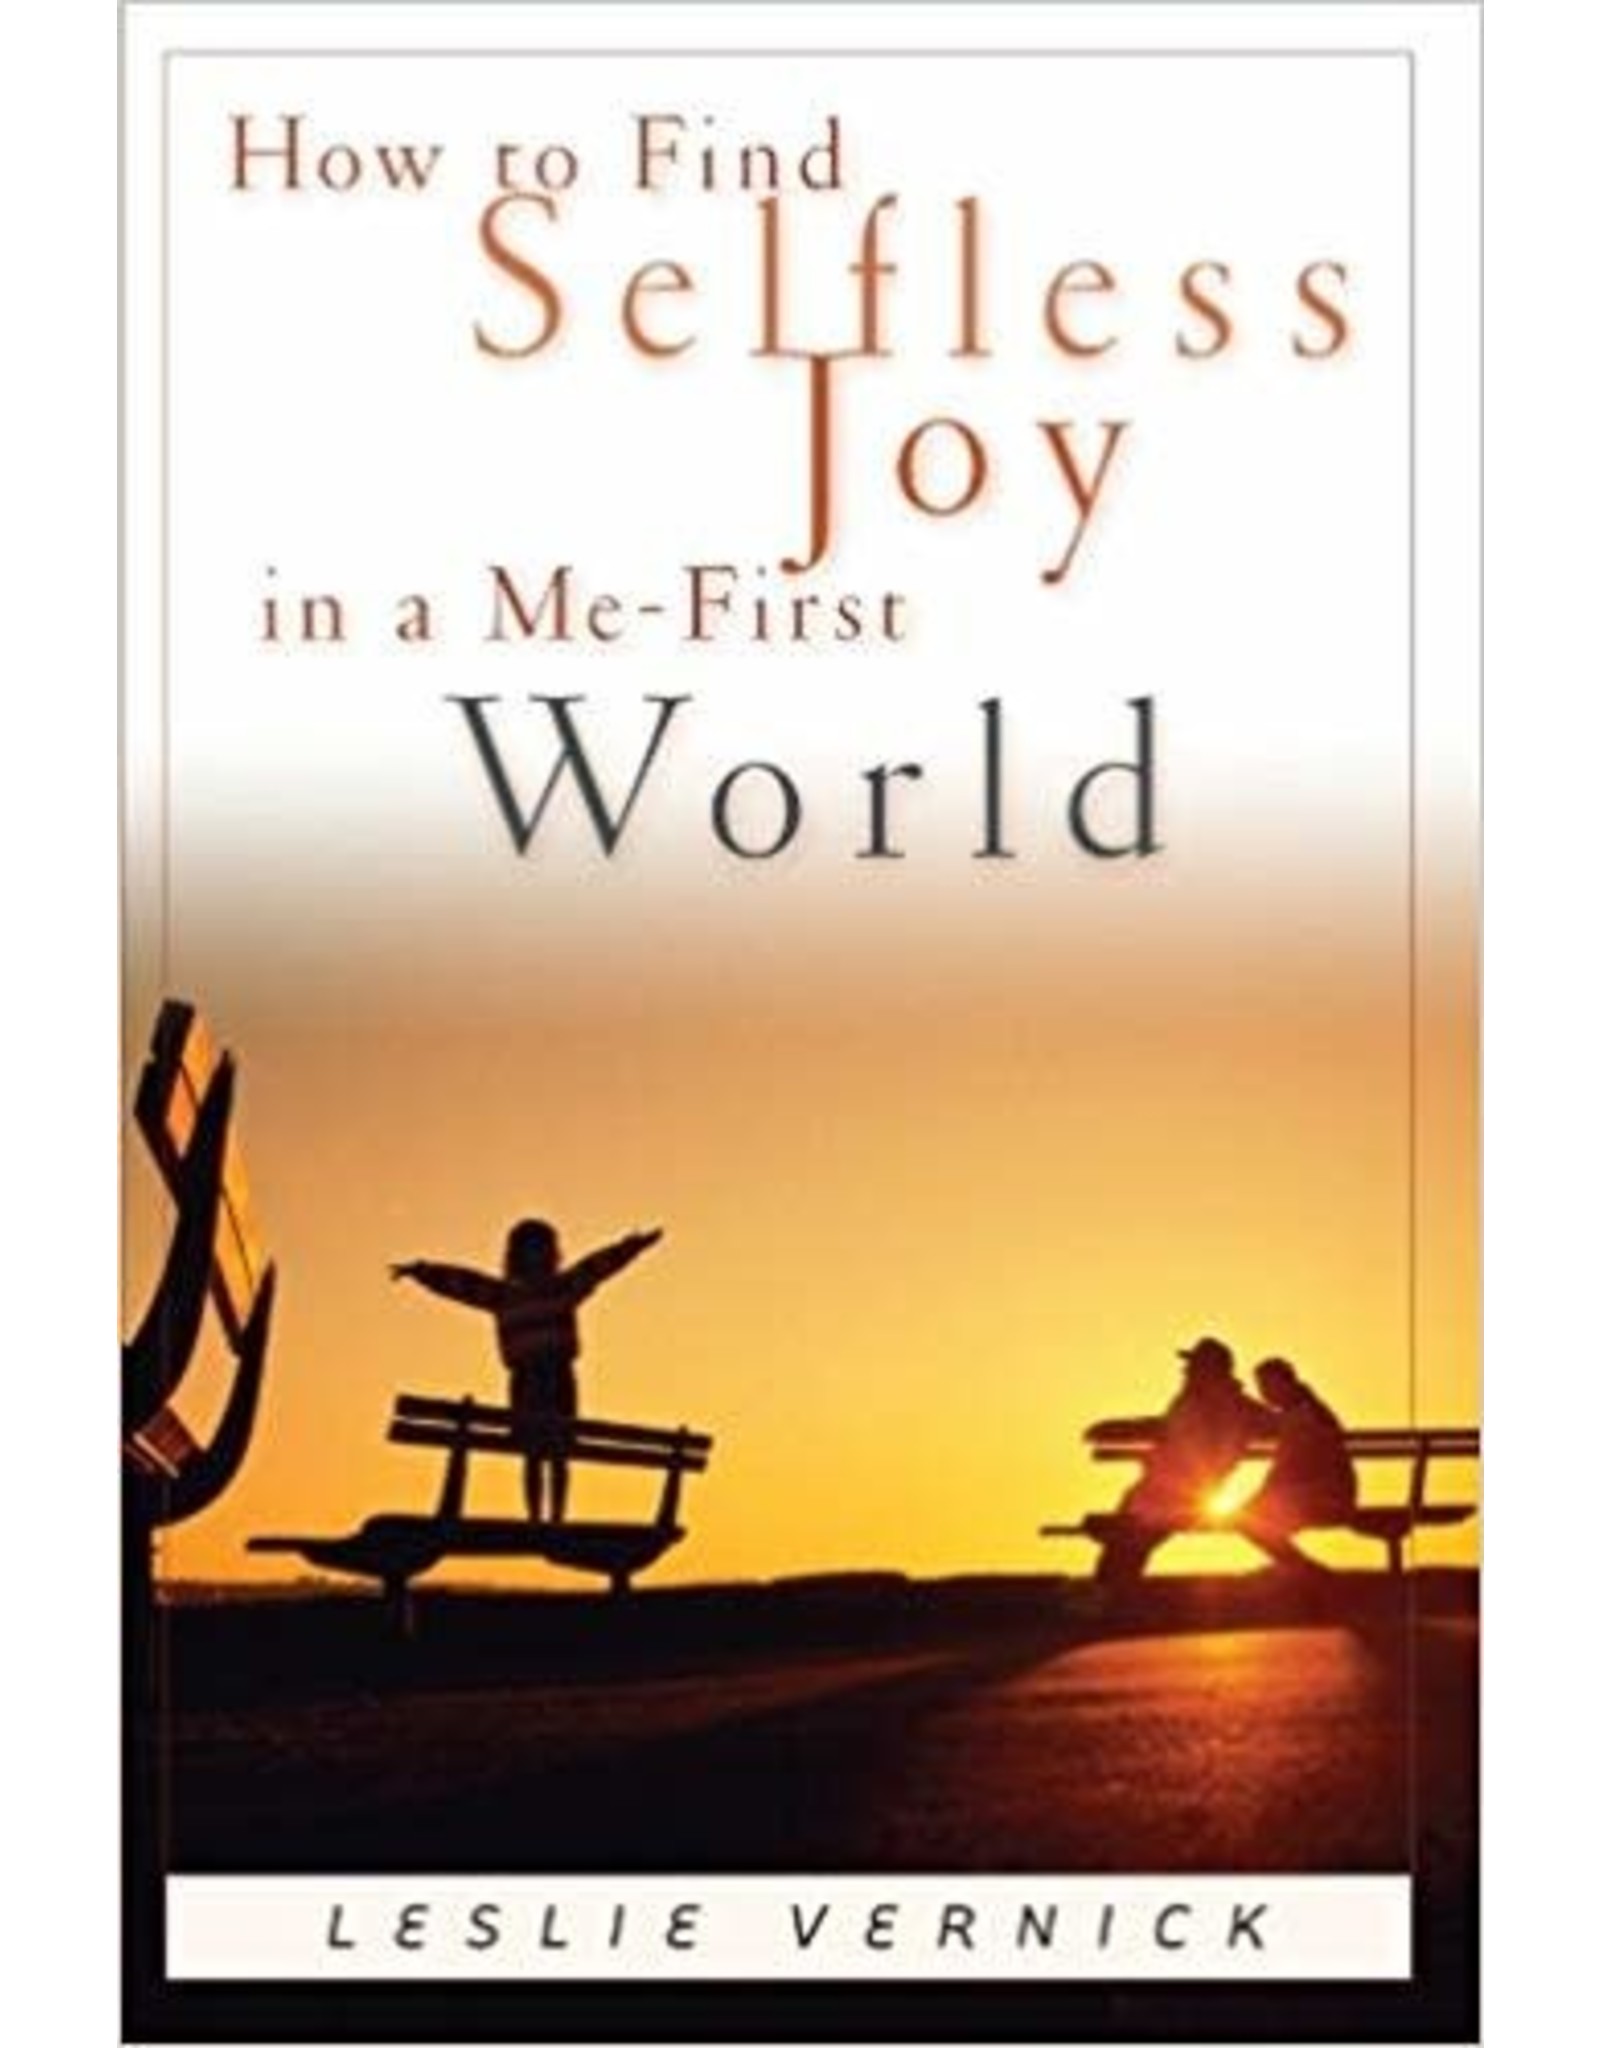 Leslie Vernick How to Find Selfless Joy in a Me - First World